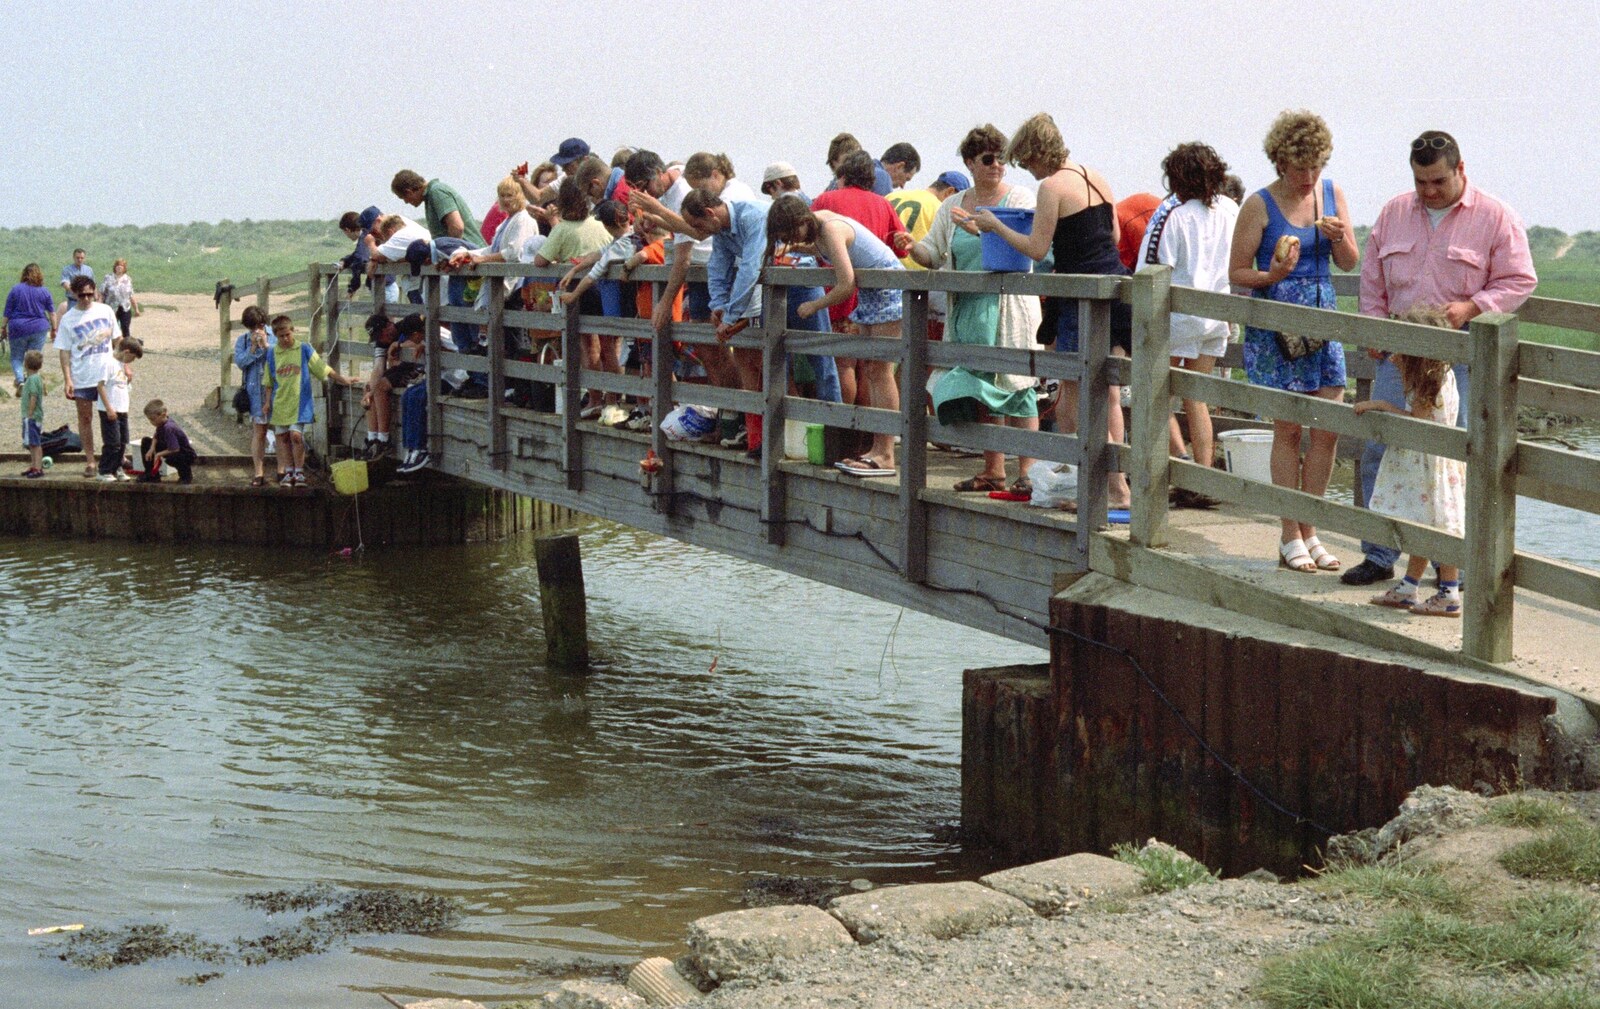 A throng of people go crabbing off the bridge from BSCC at the Beach, Walberswick, Suffolk - 15th July 1997